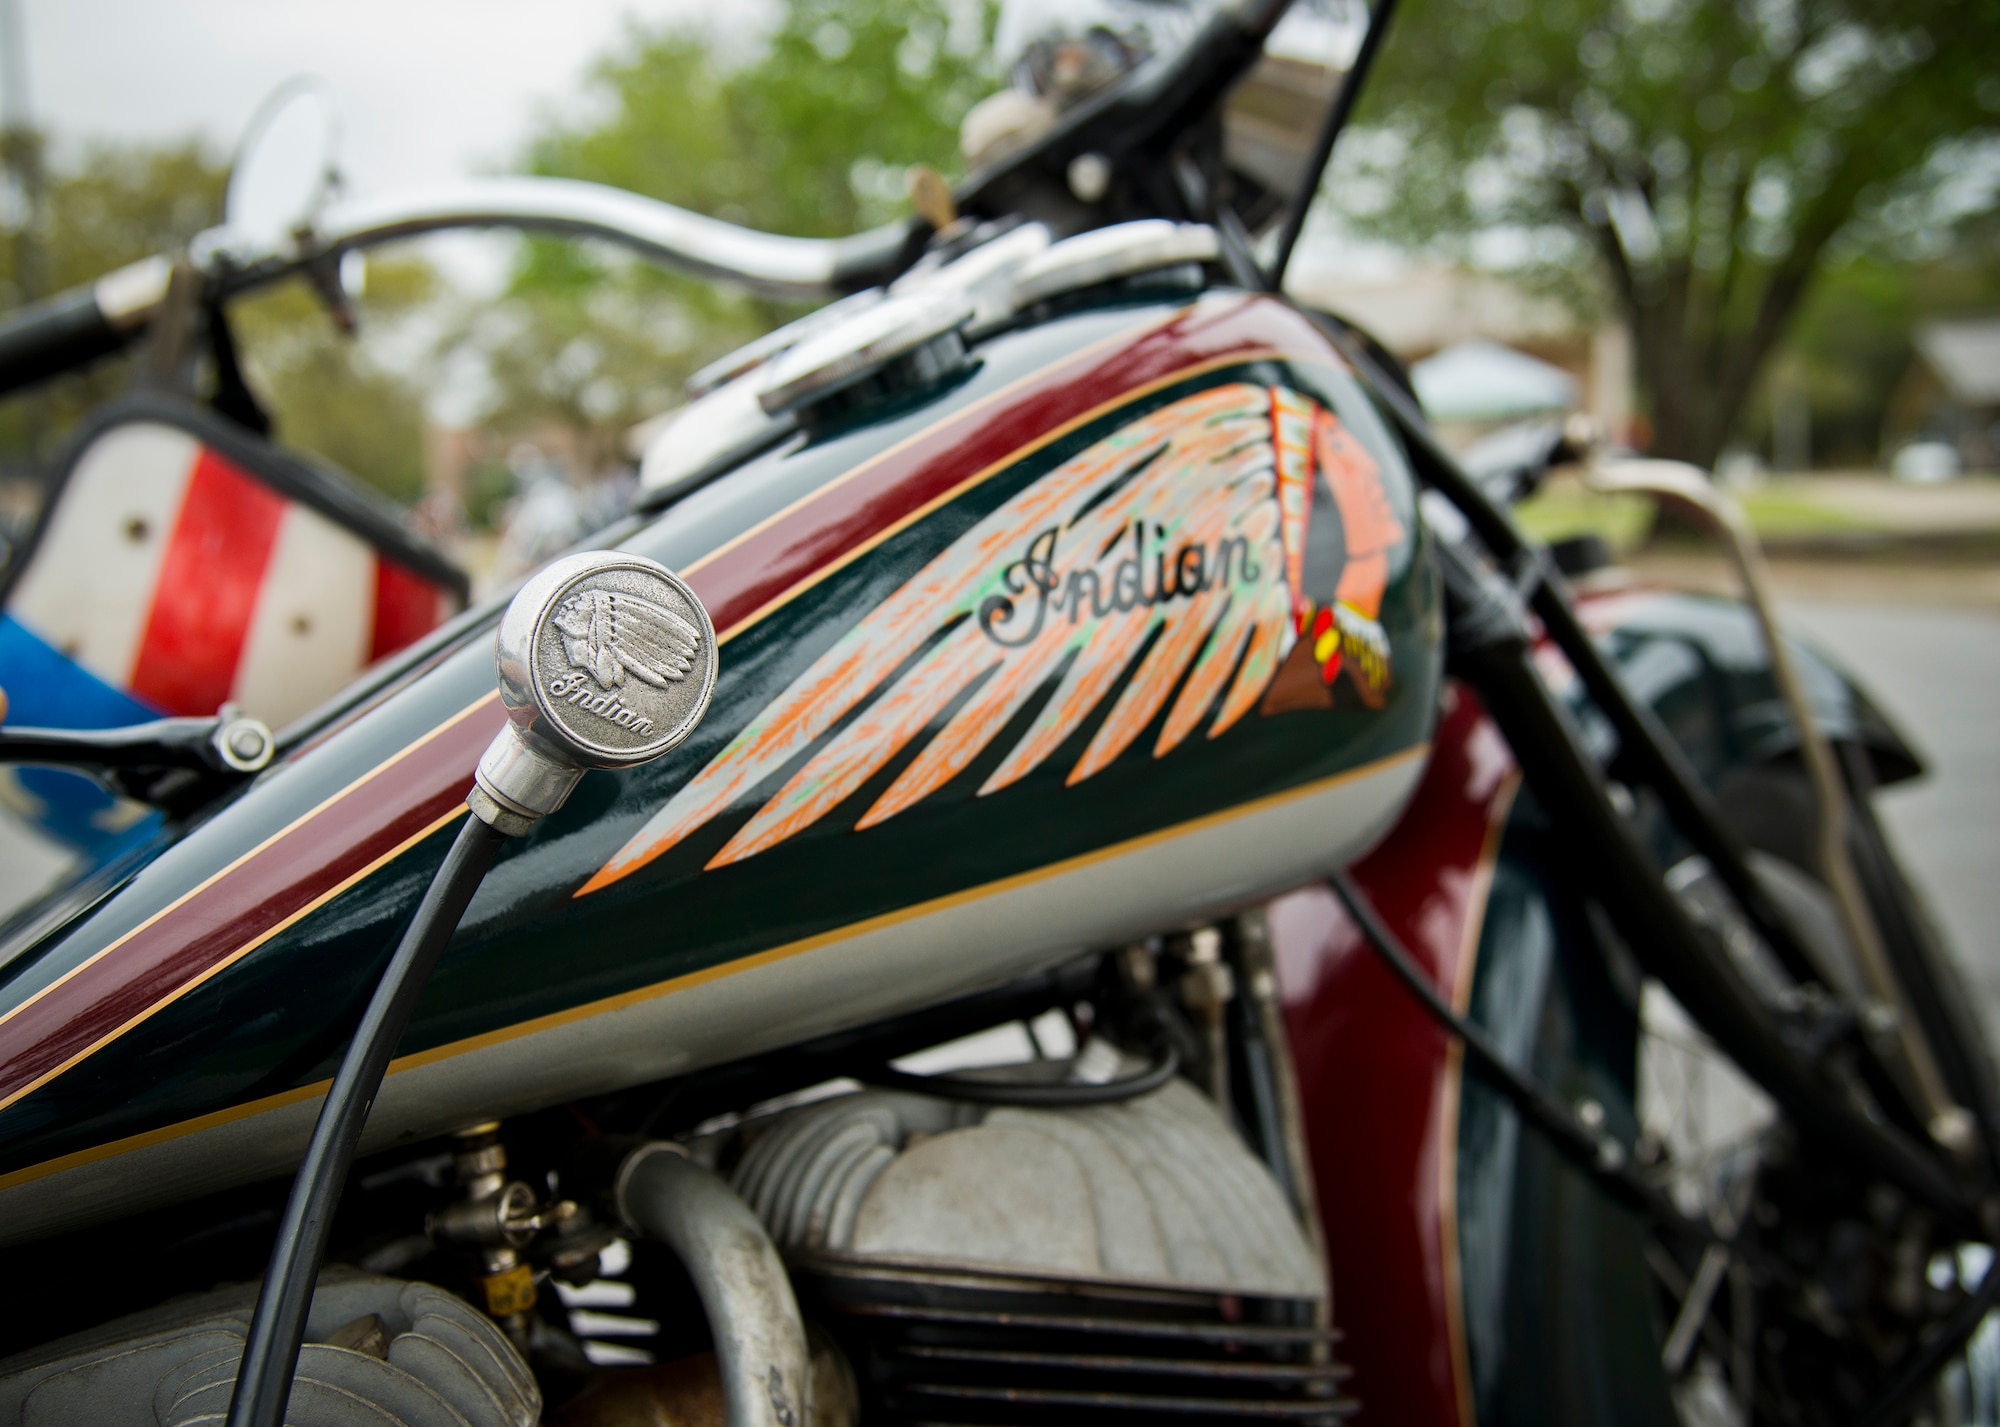 An old style-model Indian motorcycle sits at the base’s annual motorcycle safety rally April 15 at Eglin Air Force Base, Fla. More than 500 civilian and military riders rode in for the joint 53rd Wing/96th Test Wing event. (U.S. Air Force photo/Samuel King Jr.)